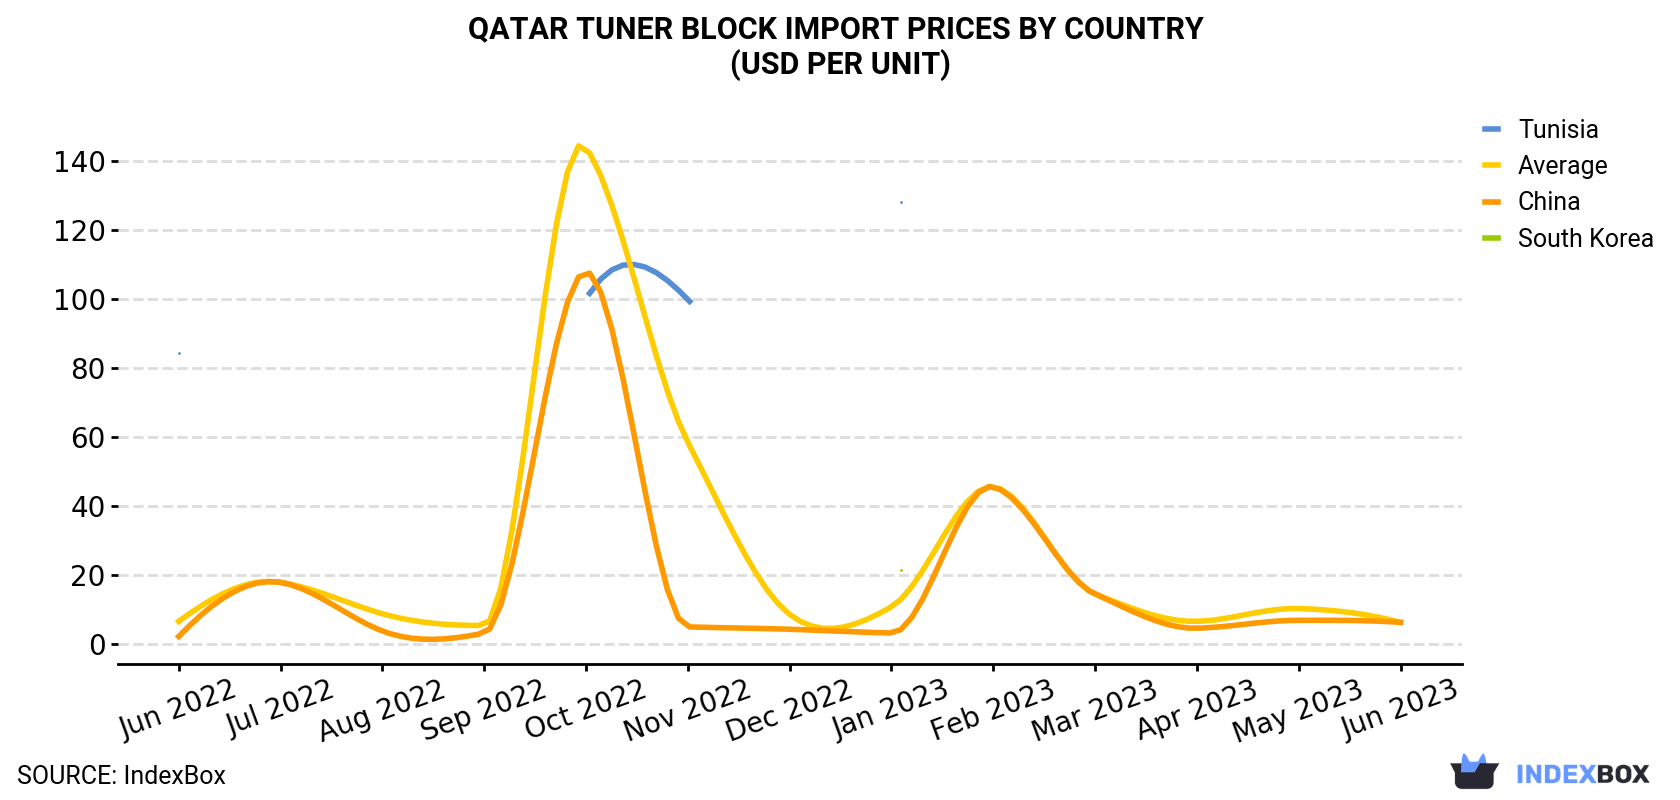 Qatar Tuner Block Import Prices By Country (USD Per Unit)